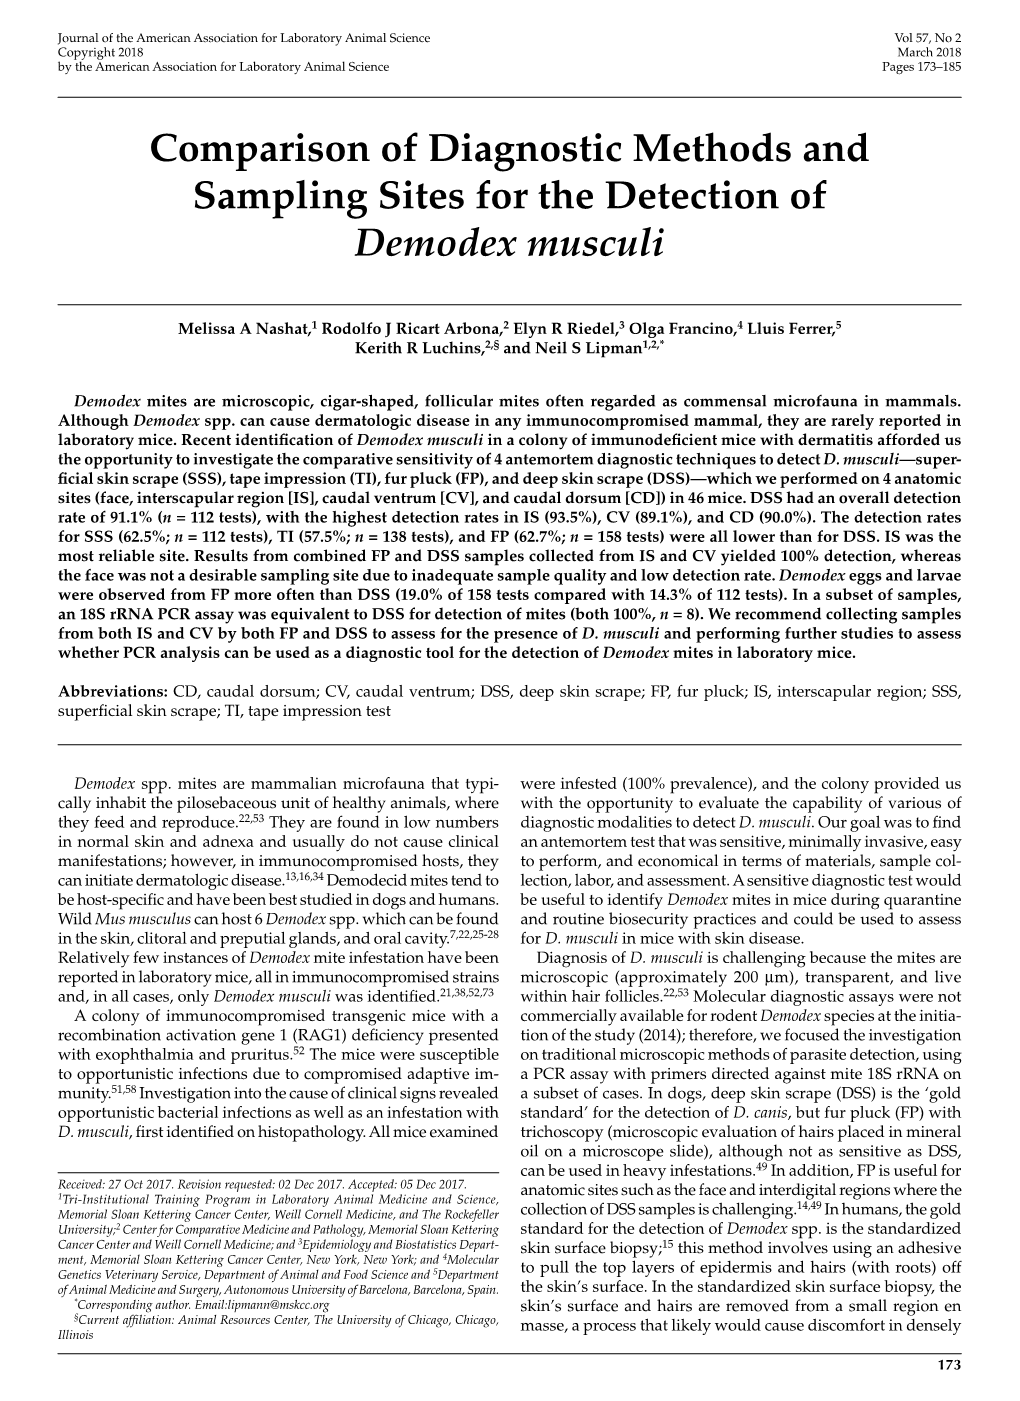 Comparison of Diagnostic Methods and Sampling Sites for the Detection of Demodex Musculi